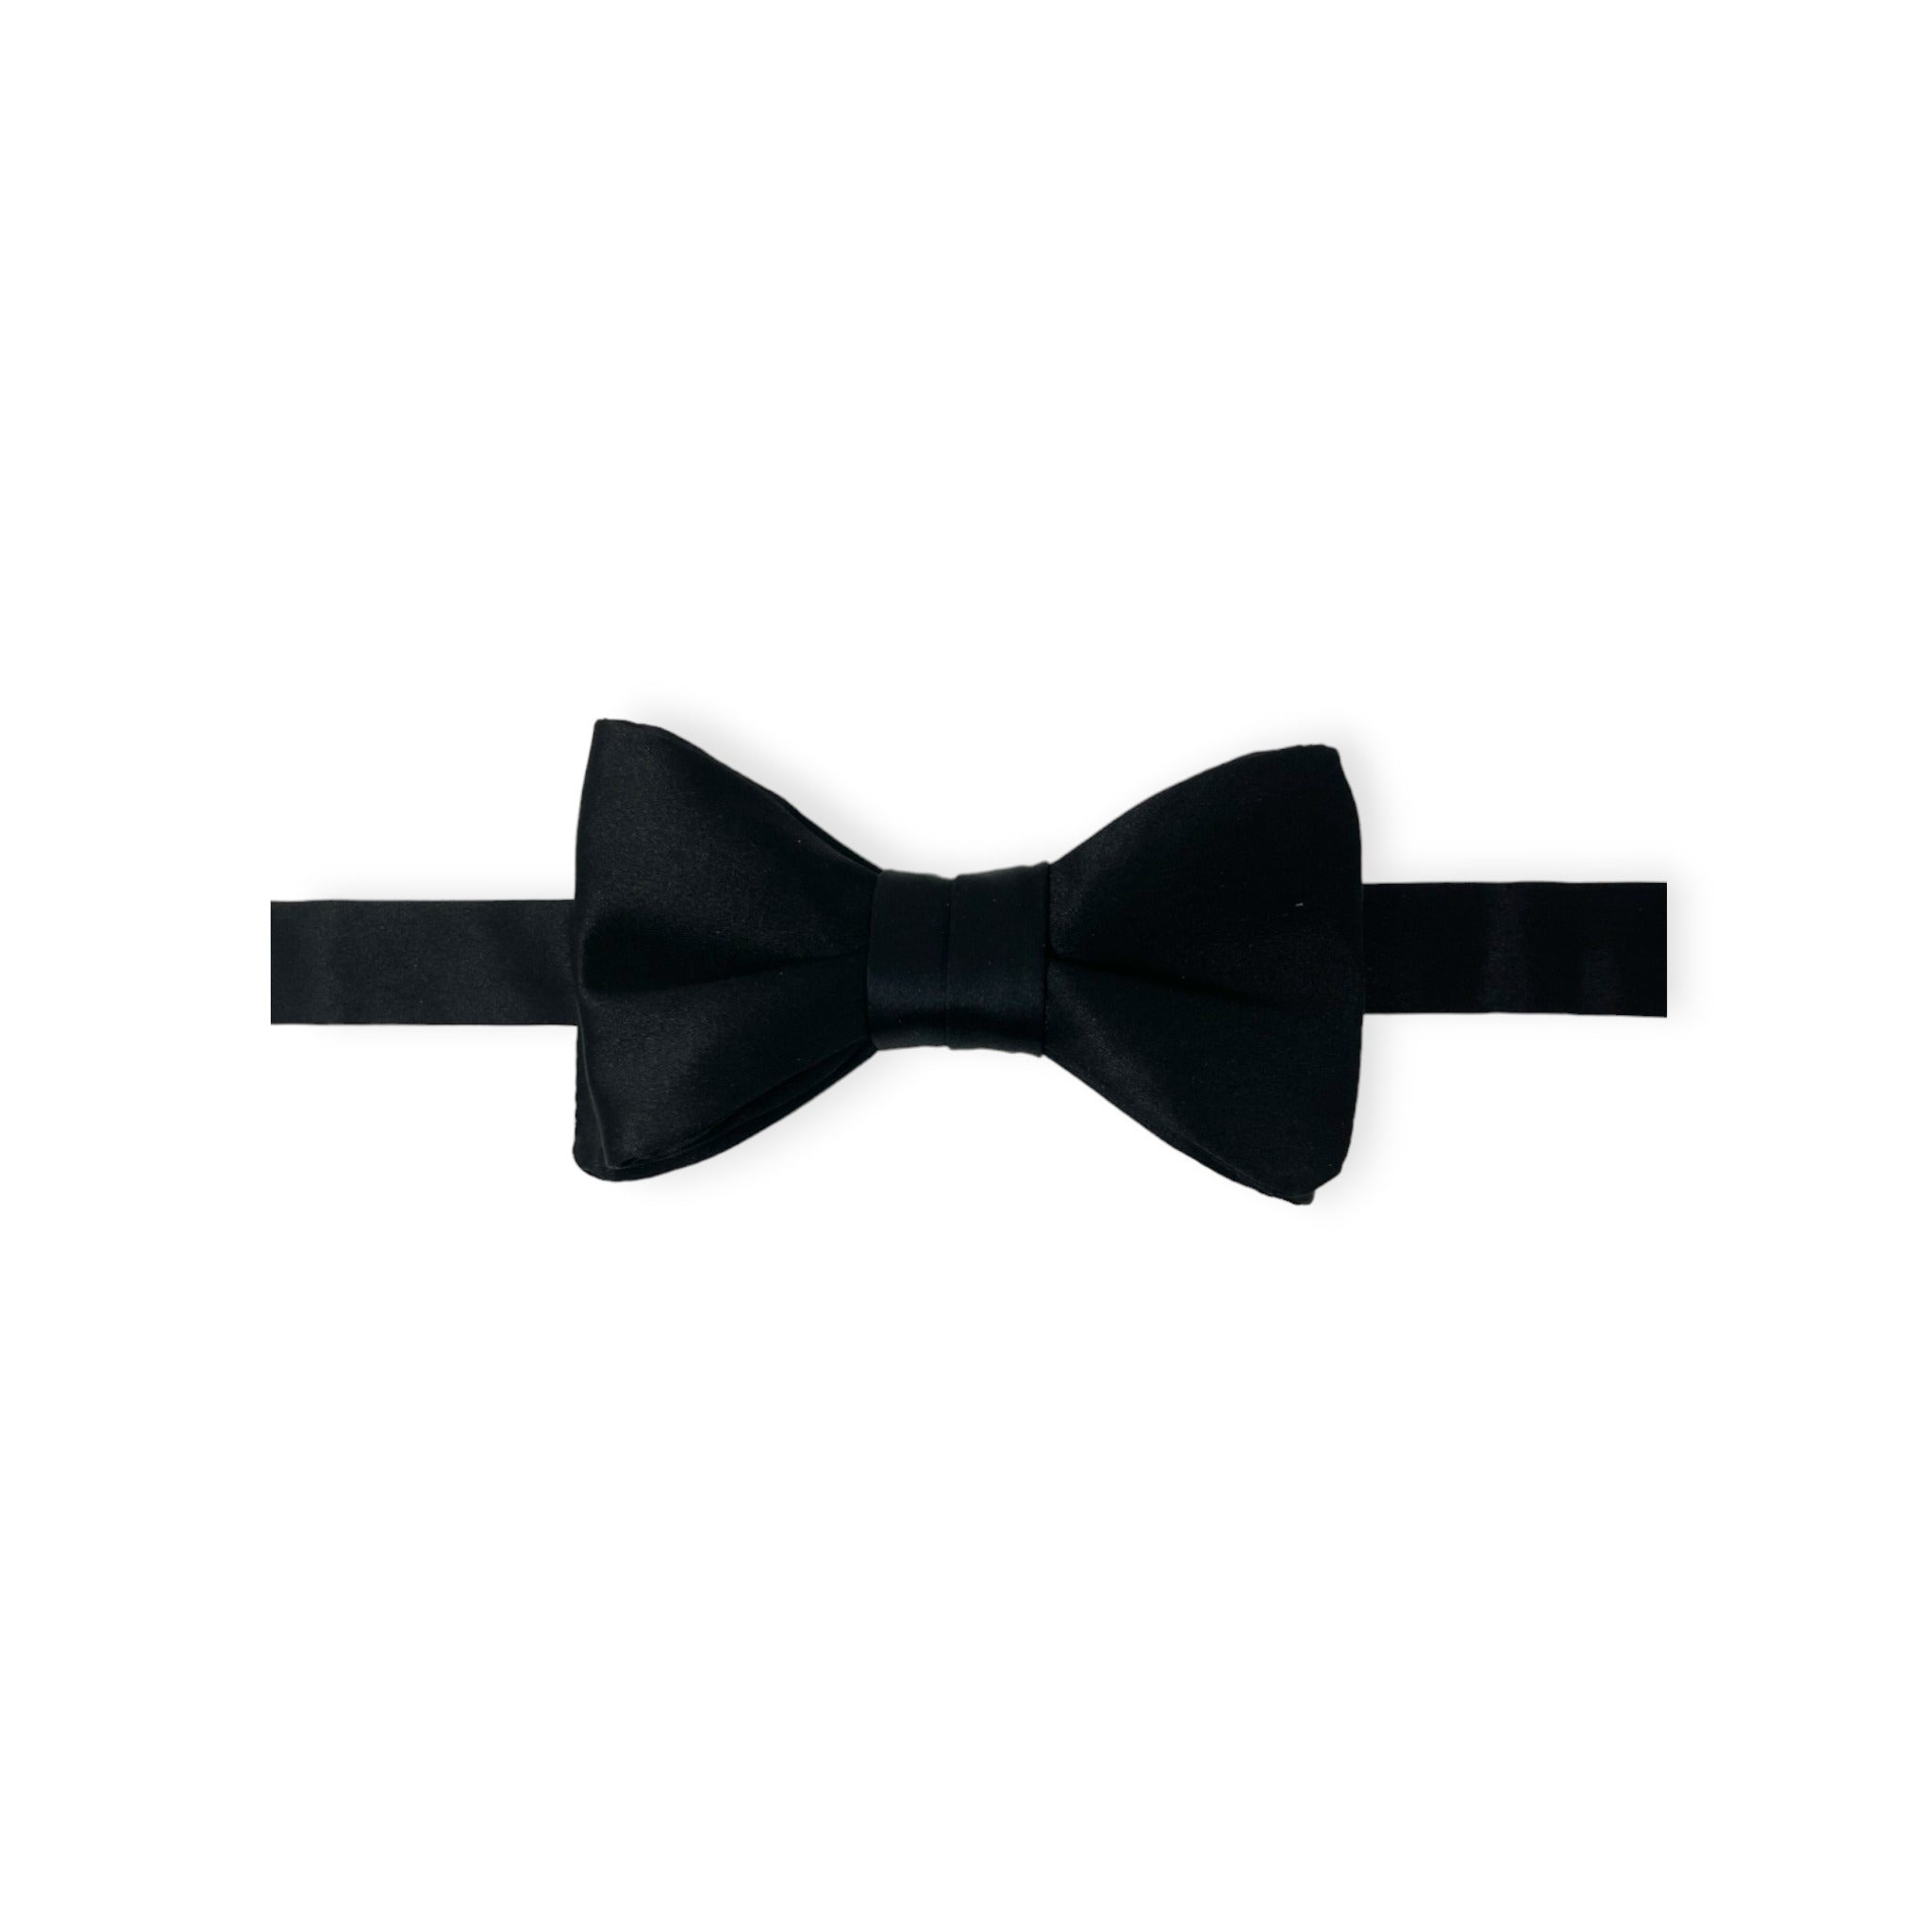 Top down view of Dion bow tie